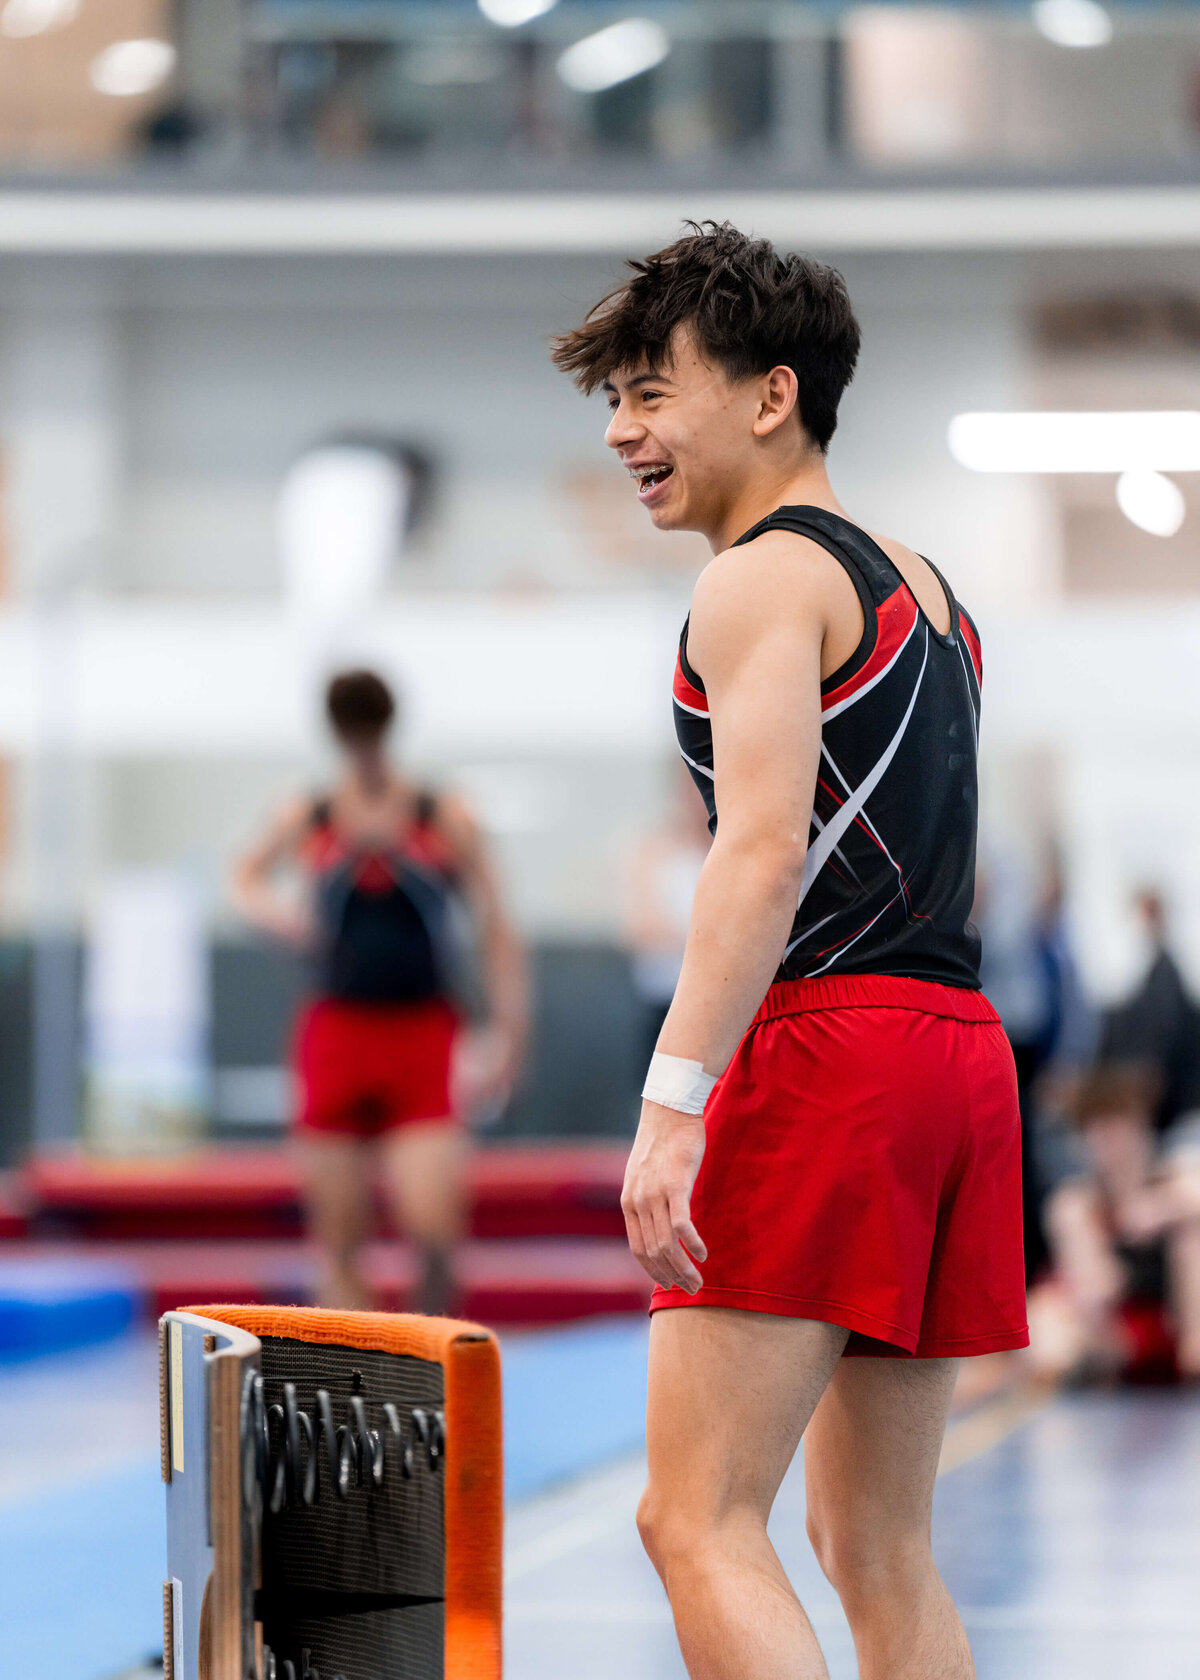 Photo by Luke O'Geil taken at the 2023 inaugural Grizzly Classic men's artistic gymnastics competitionA1_01984